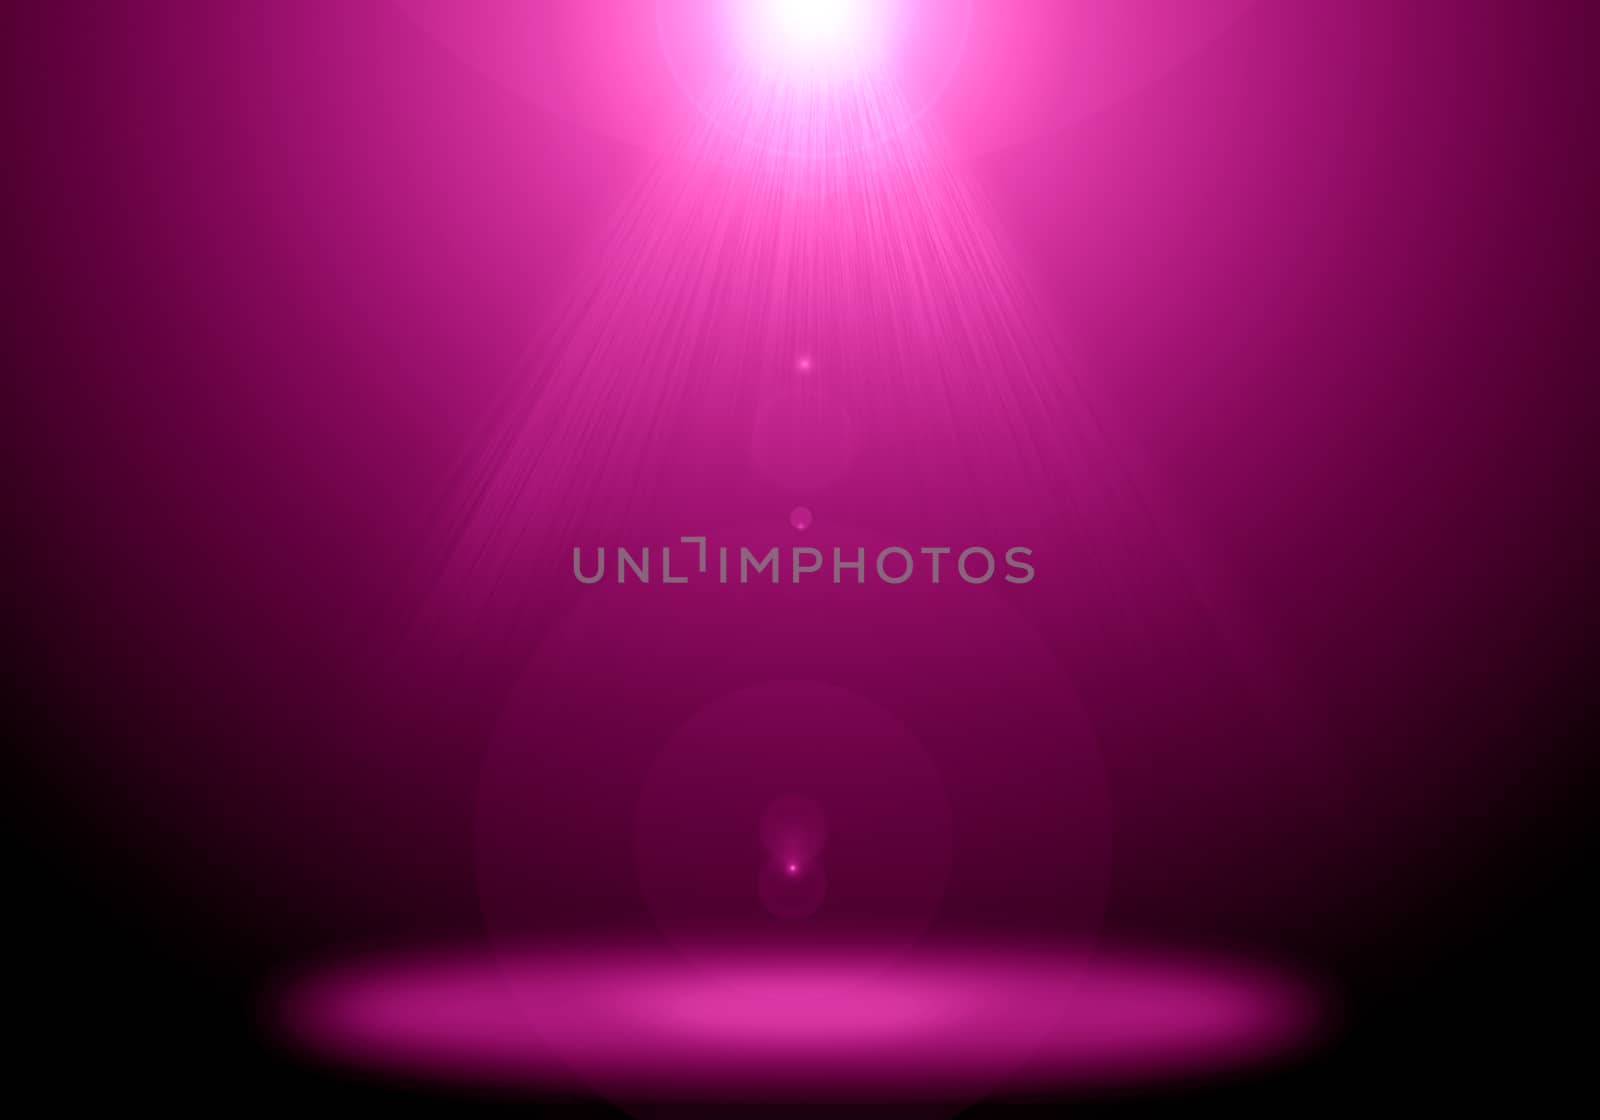 Abstract image of pink lighting flare on the floor stage.